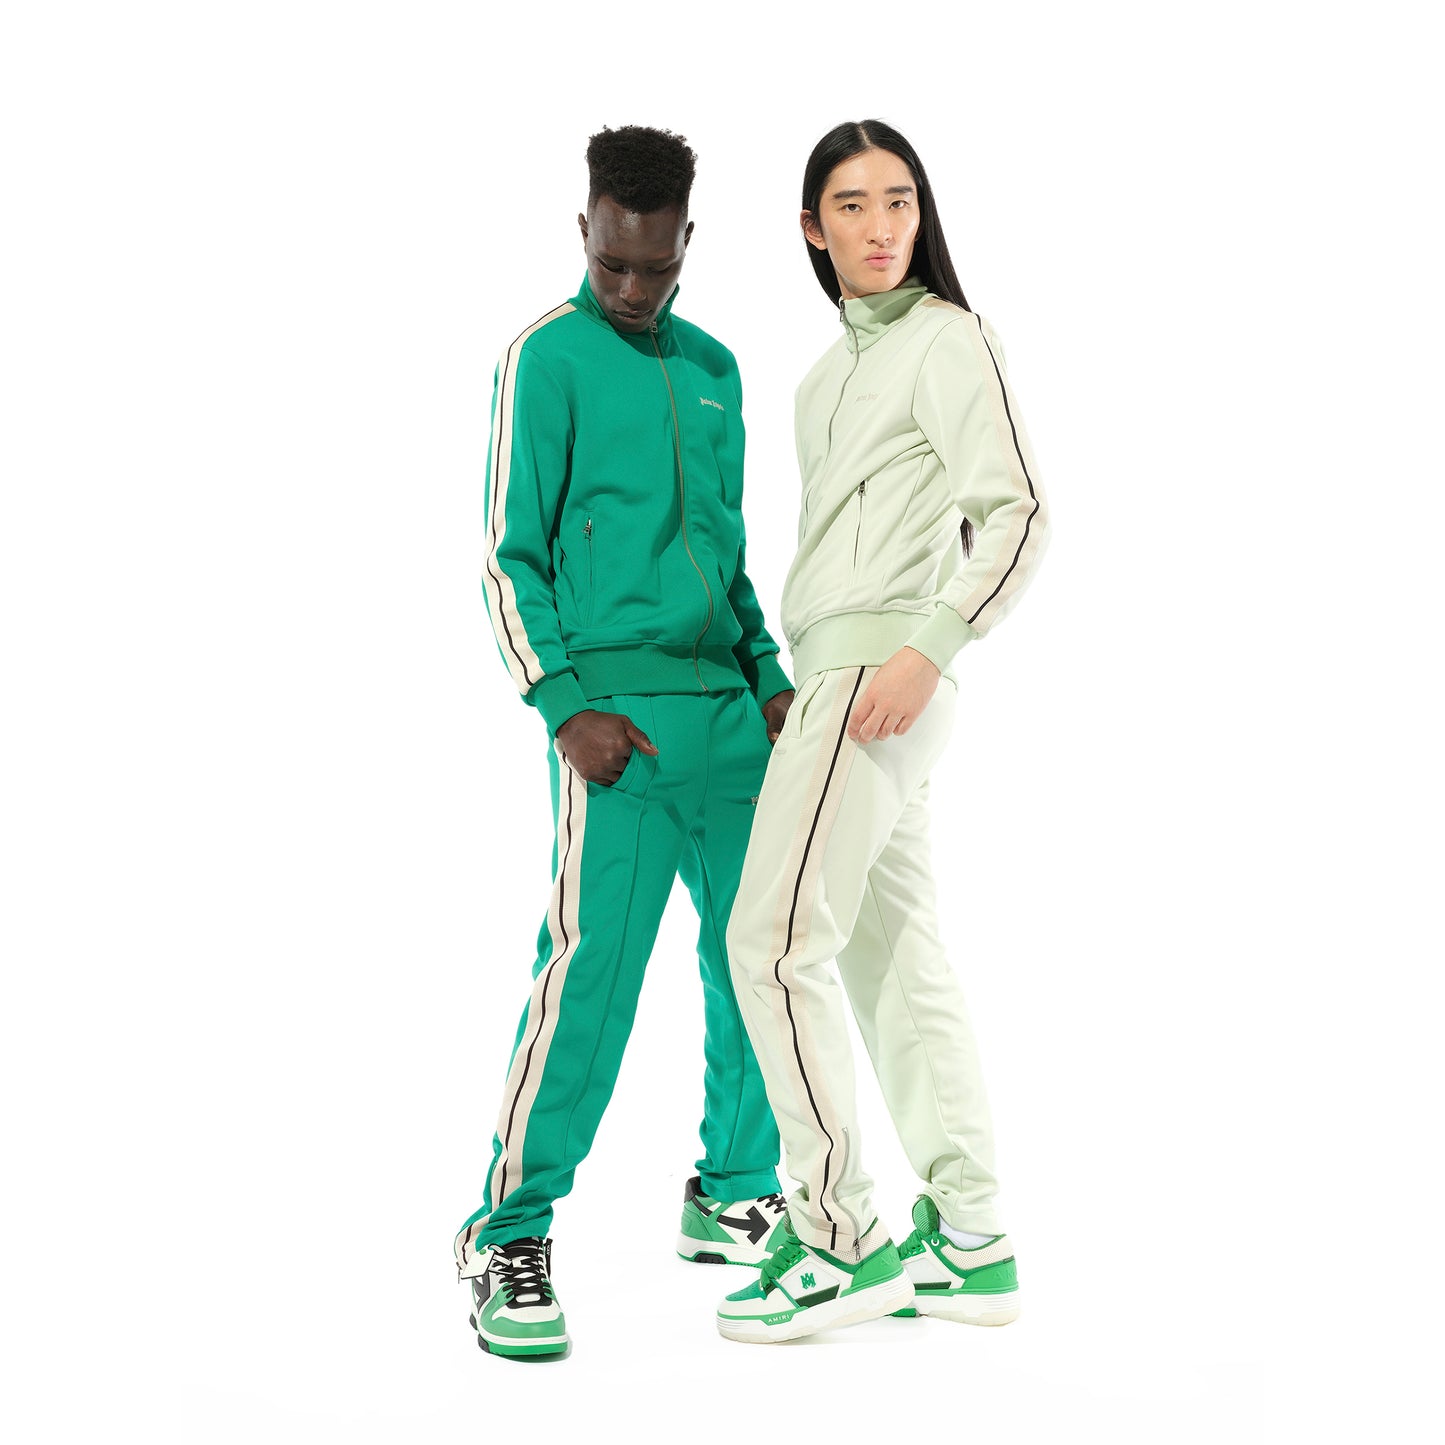 Classic Logo Track Pants in Mint/Off White